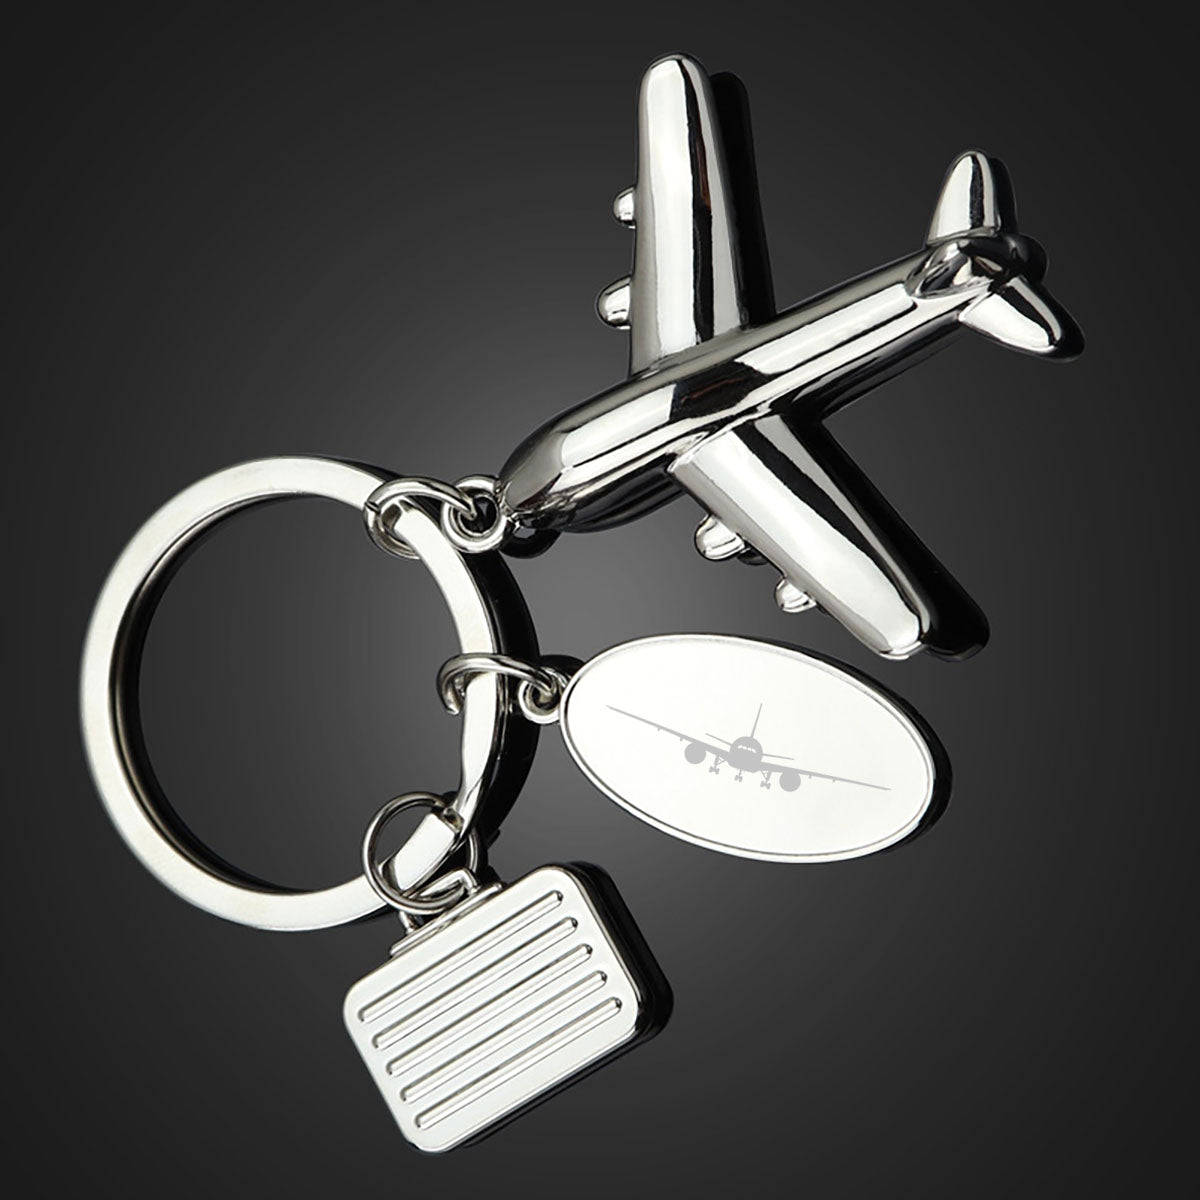 Boeing 777 Silhouette Designed Suitcase Airplane Key Chains